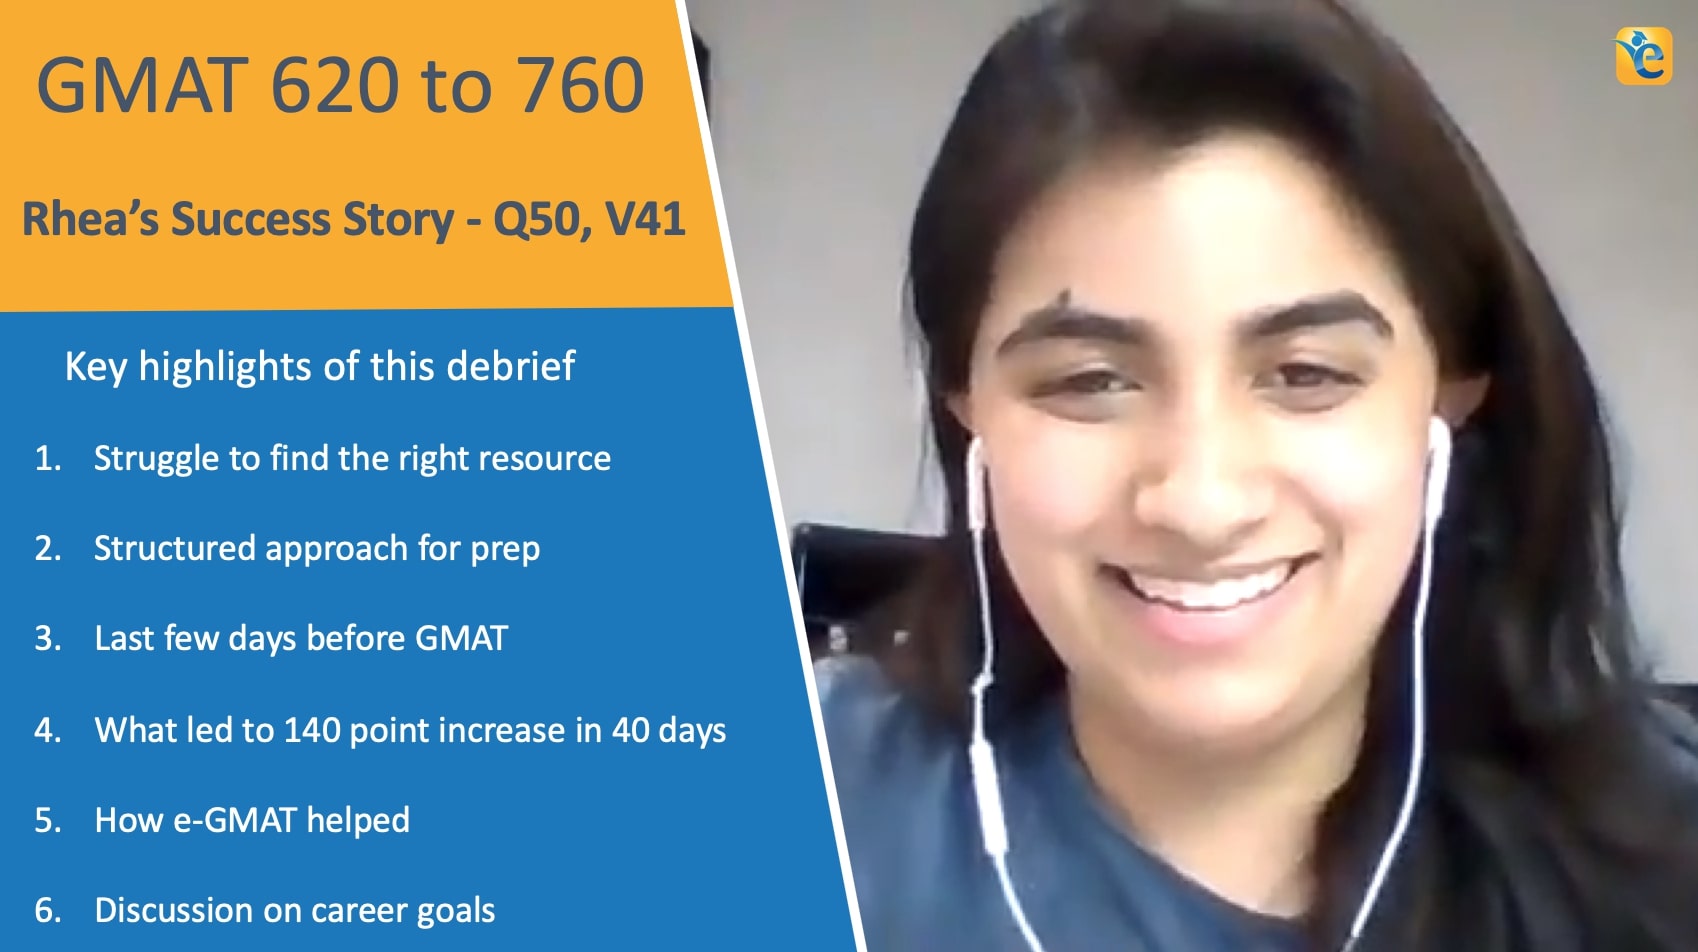 GMAT Preparation Time reduced by a Proper Study Plan: GMAT Success Story – 620 to 760